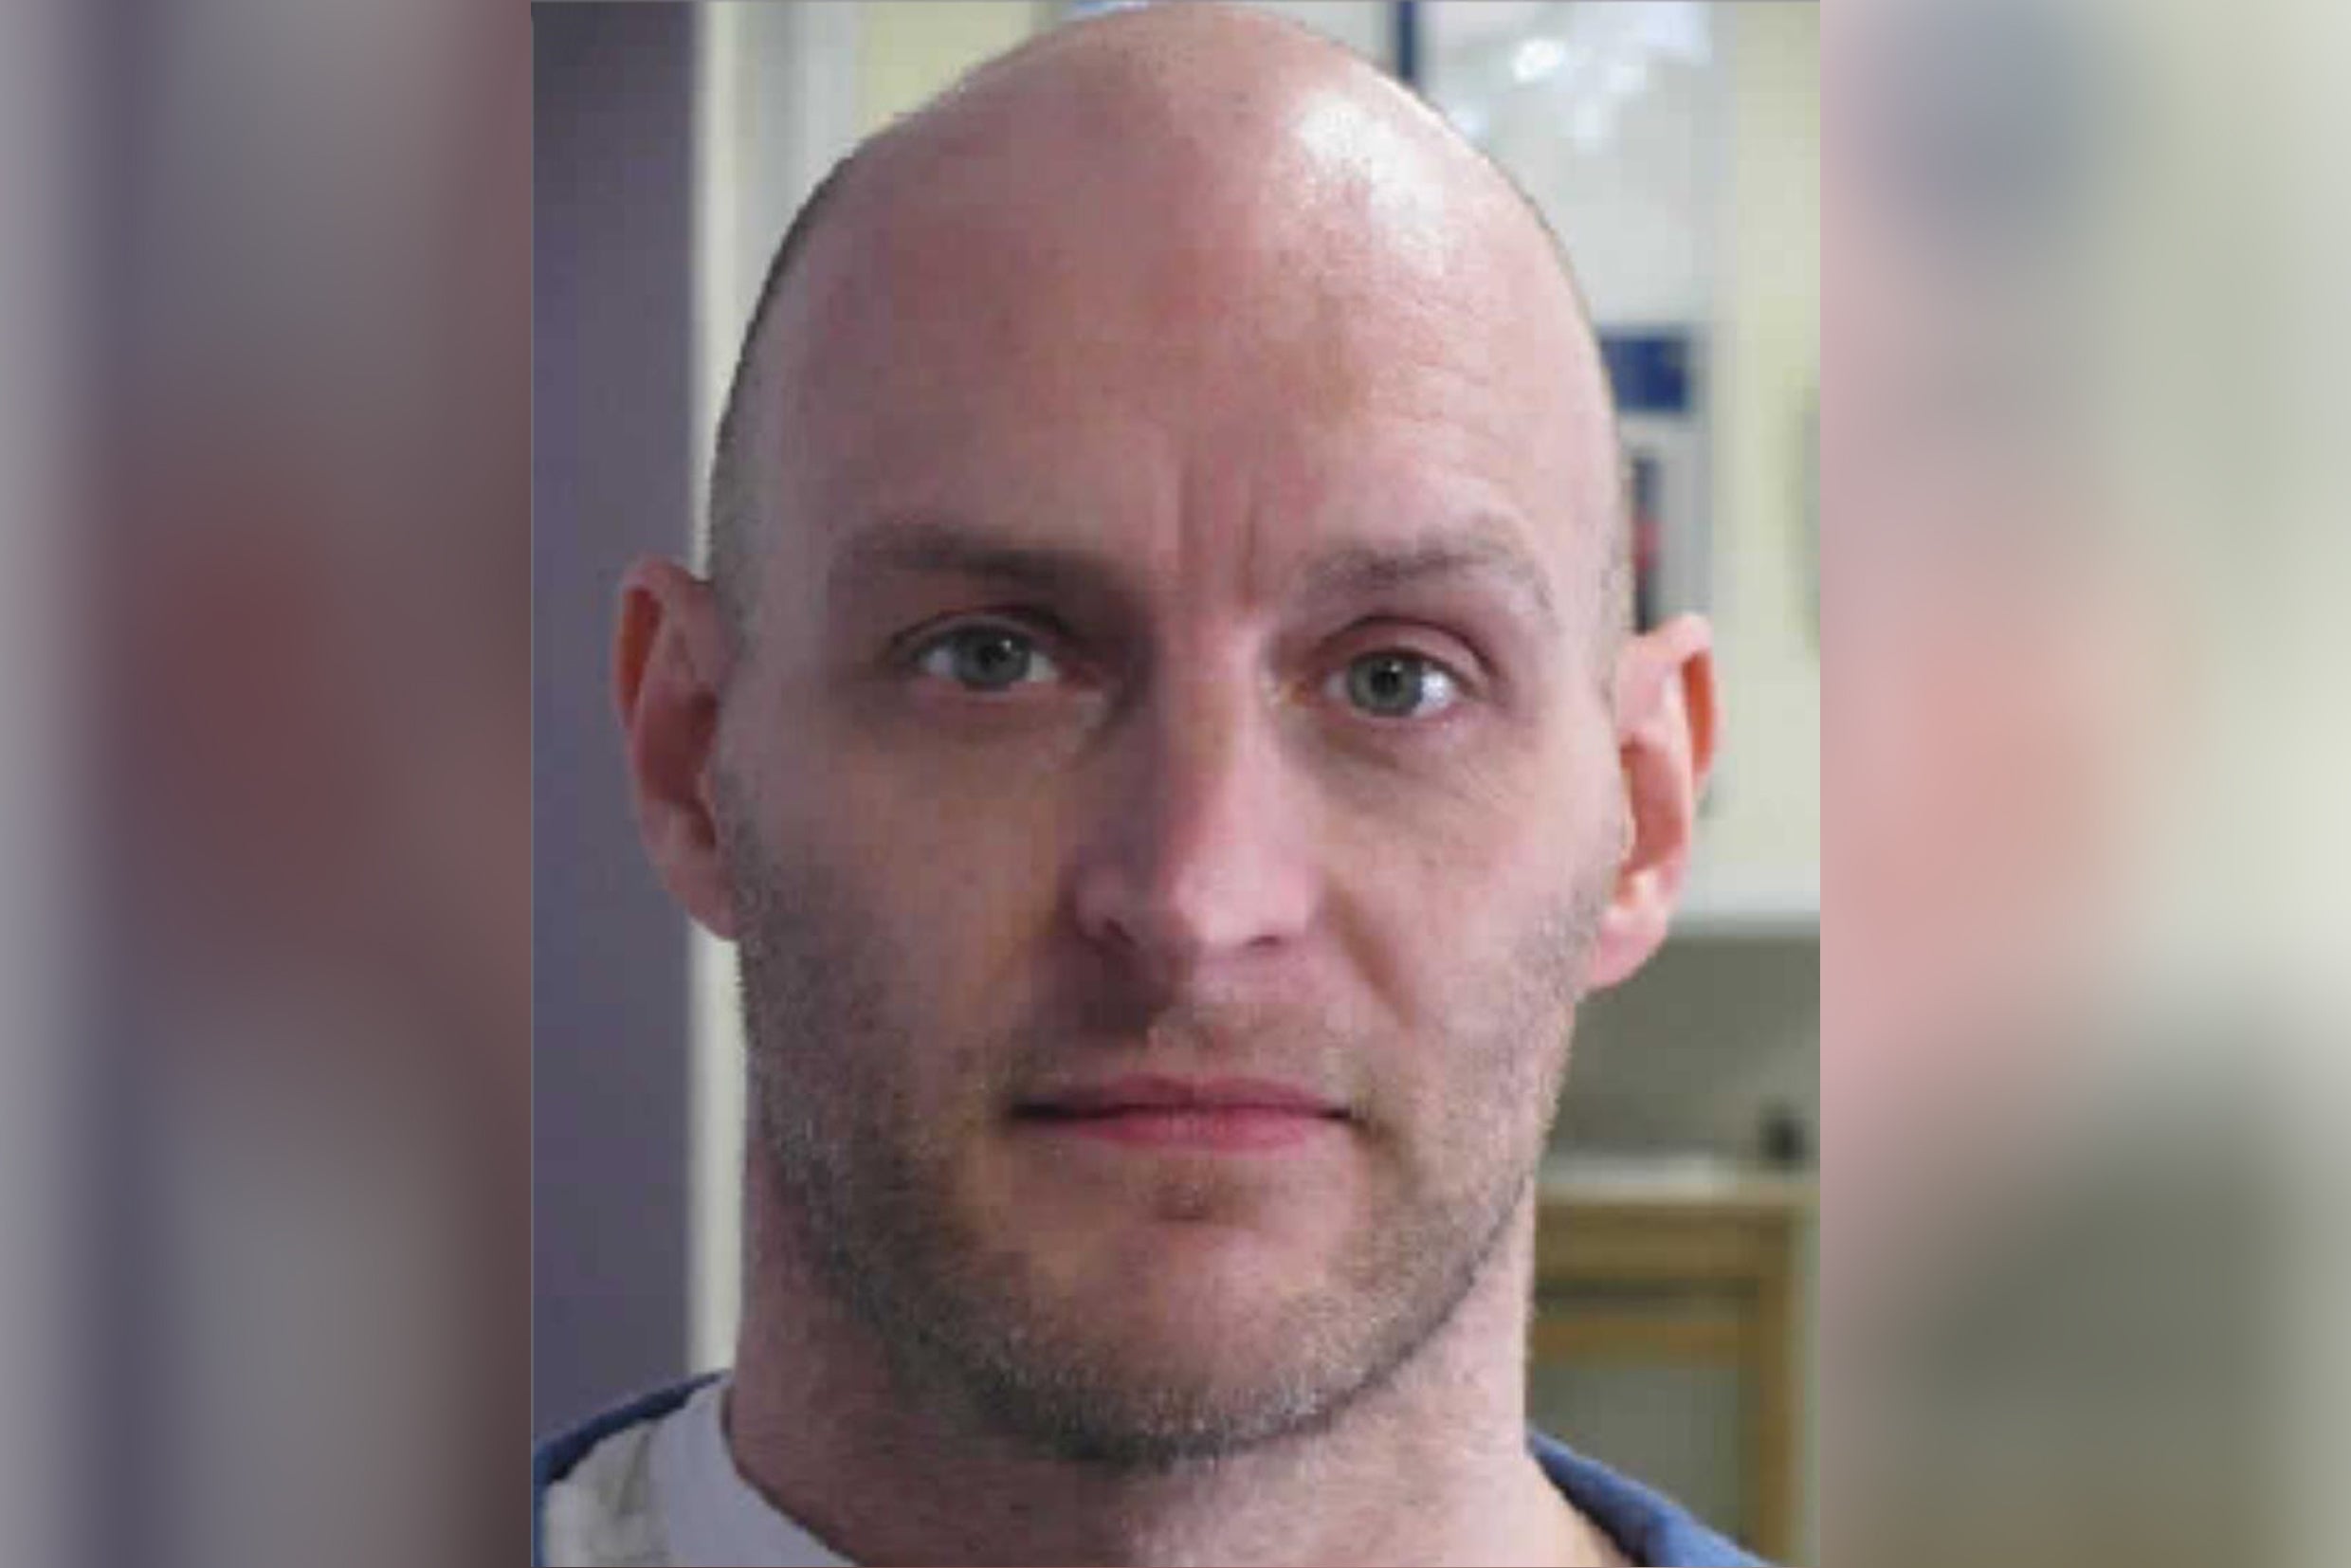 A coroner has issued a Prevention of Future Deaths Notice following the death of IPP prisoner Scott Rider